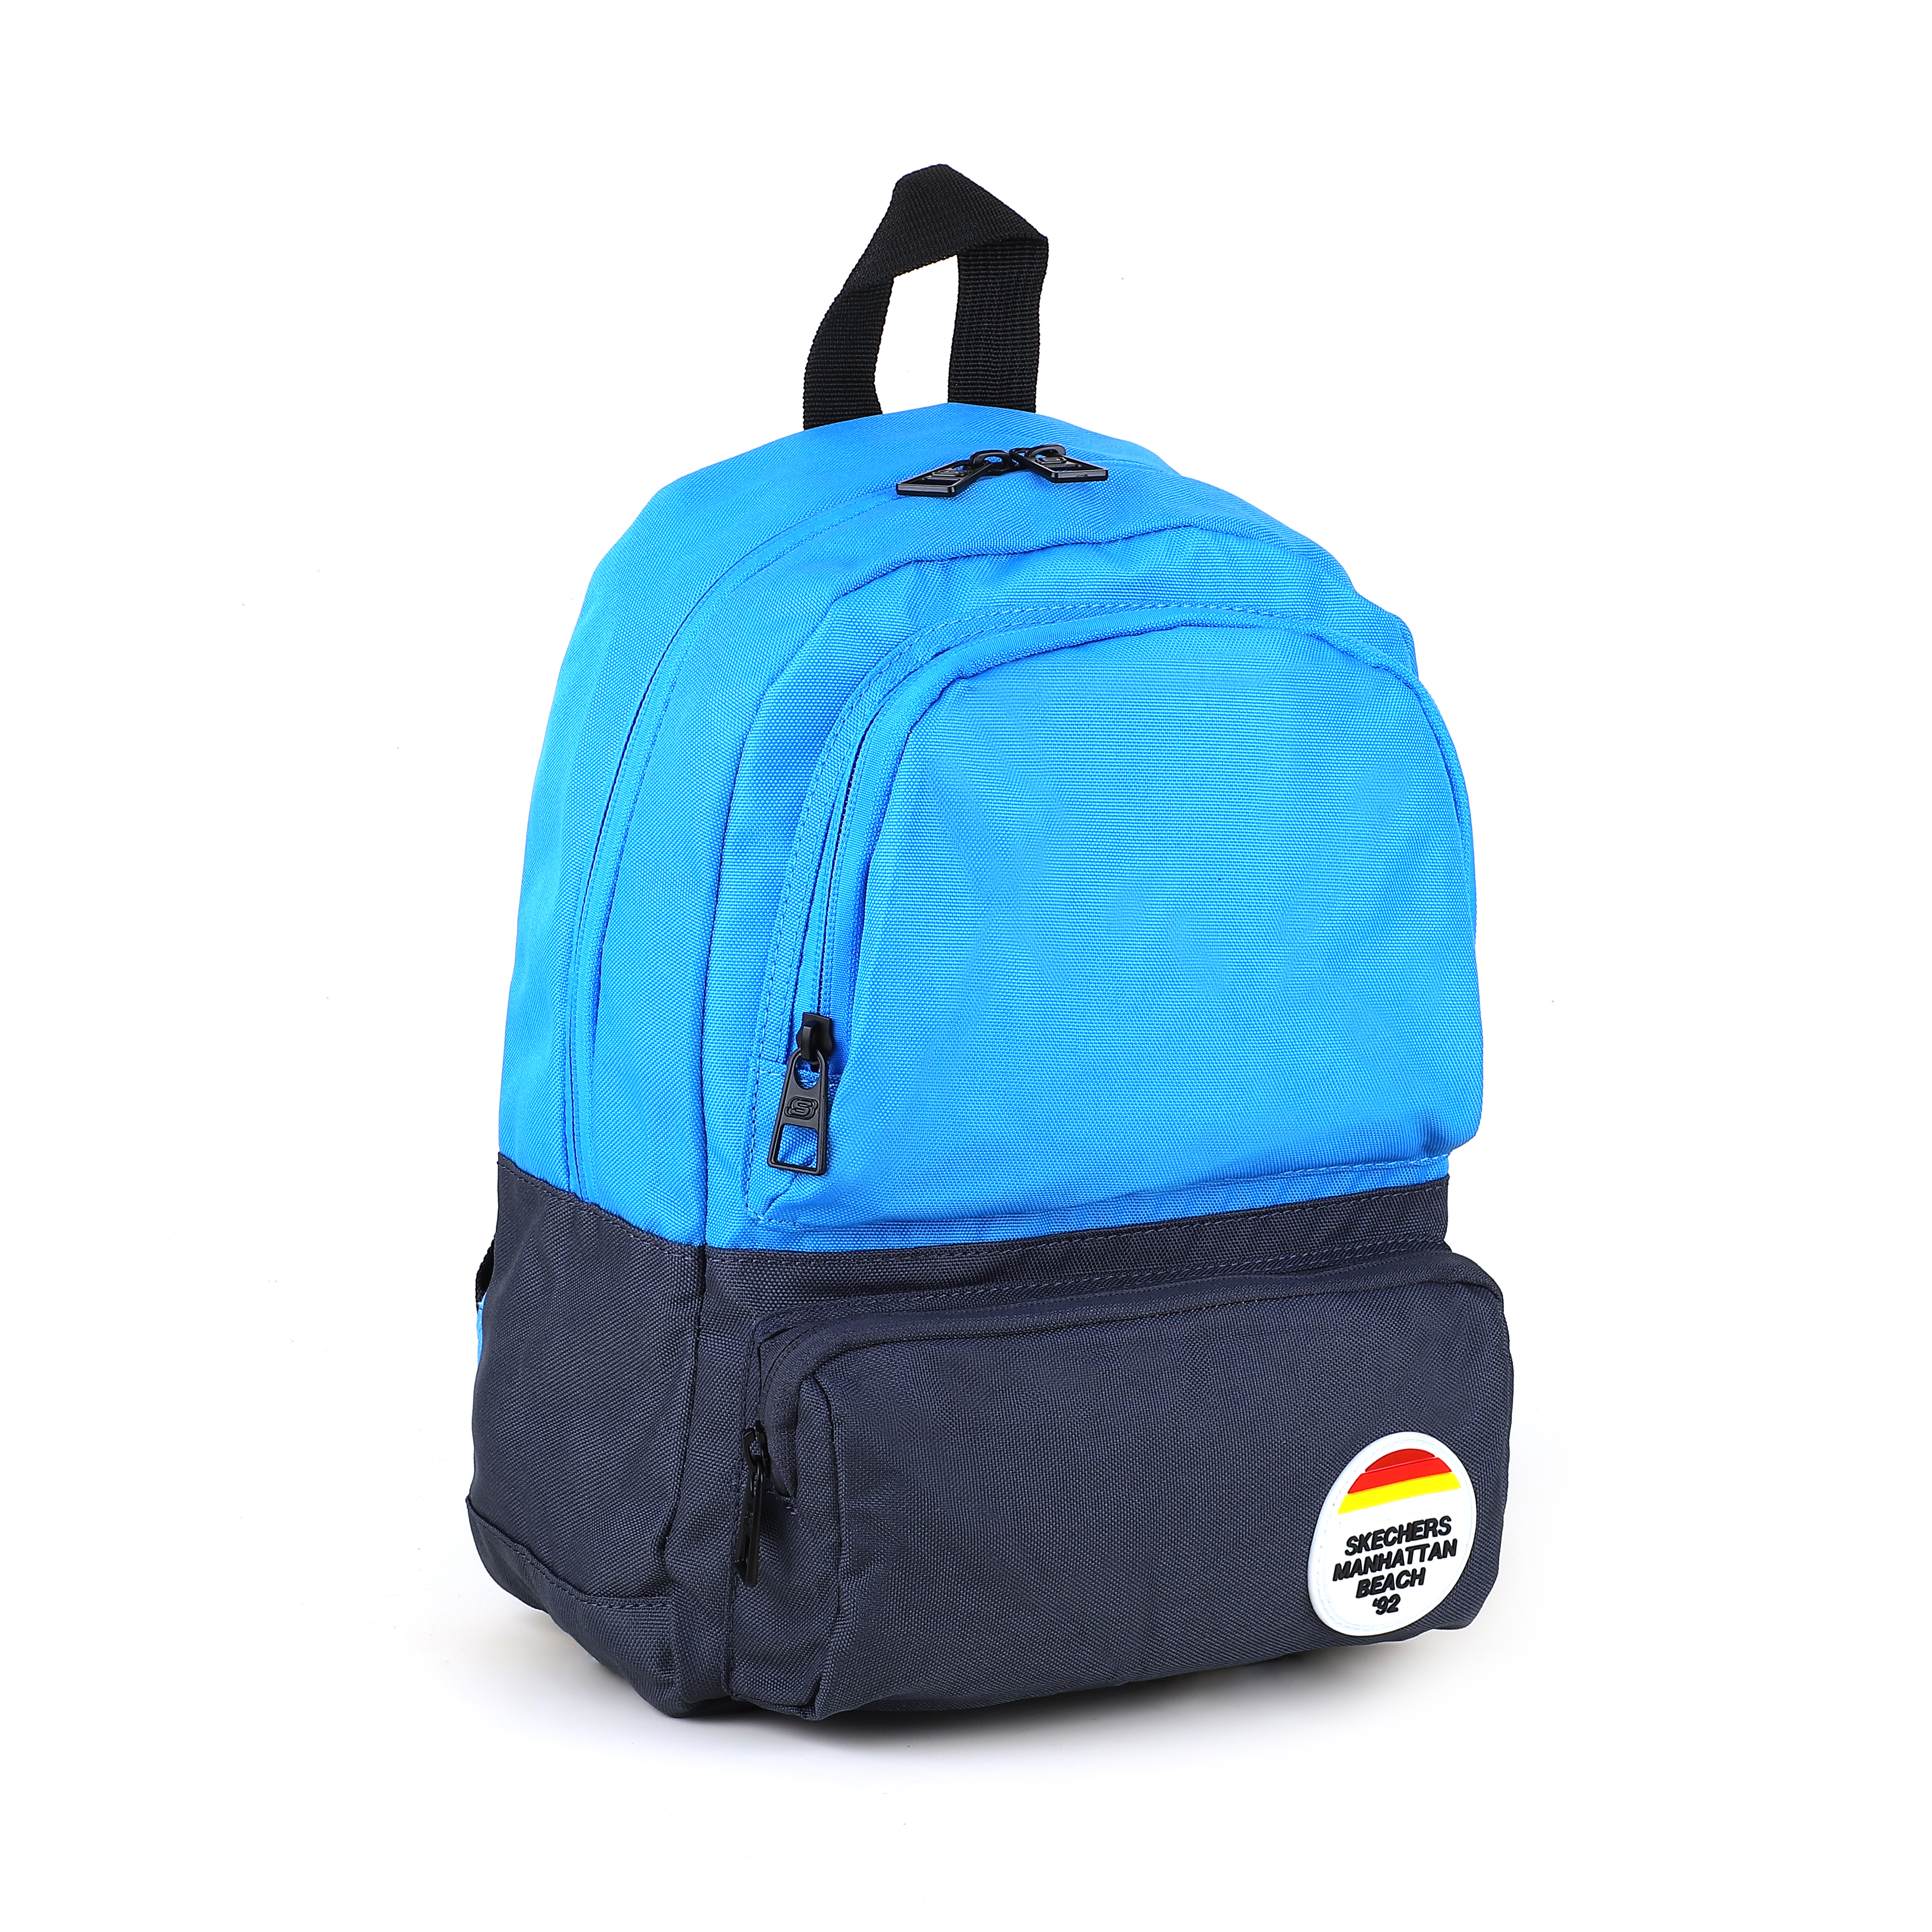 M.C.O.A Small Laptop backpack, BLUE NIGHTS image number null